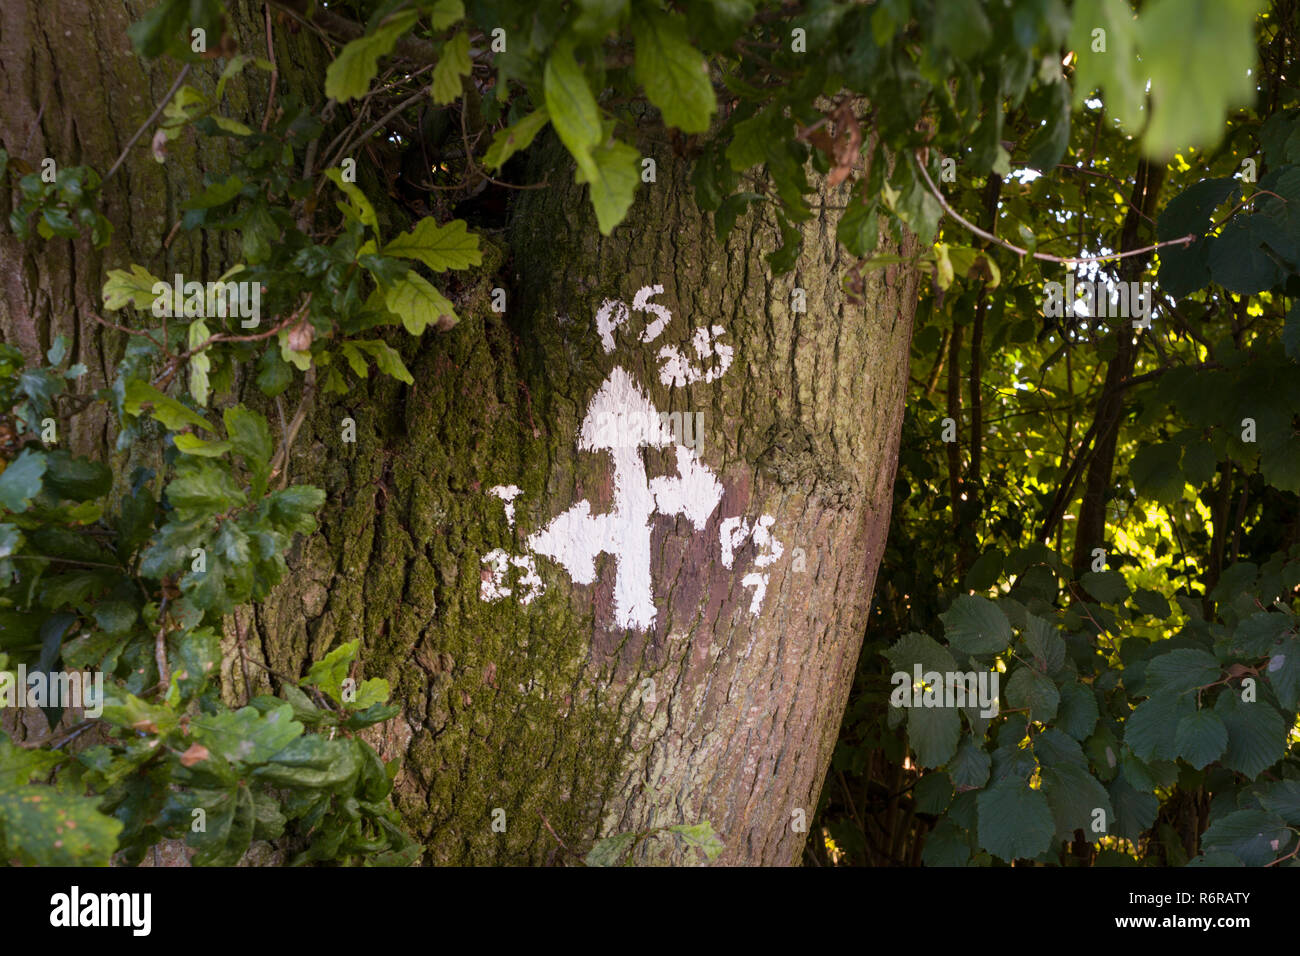 A painted white direction sign on the bark of a tree in Stonor, Oxfordshire shows the directions of the footpaths Stock Photo